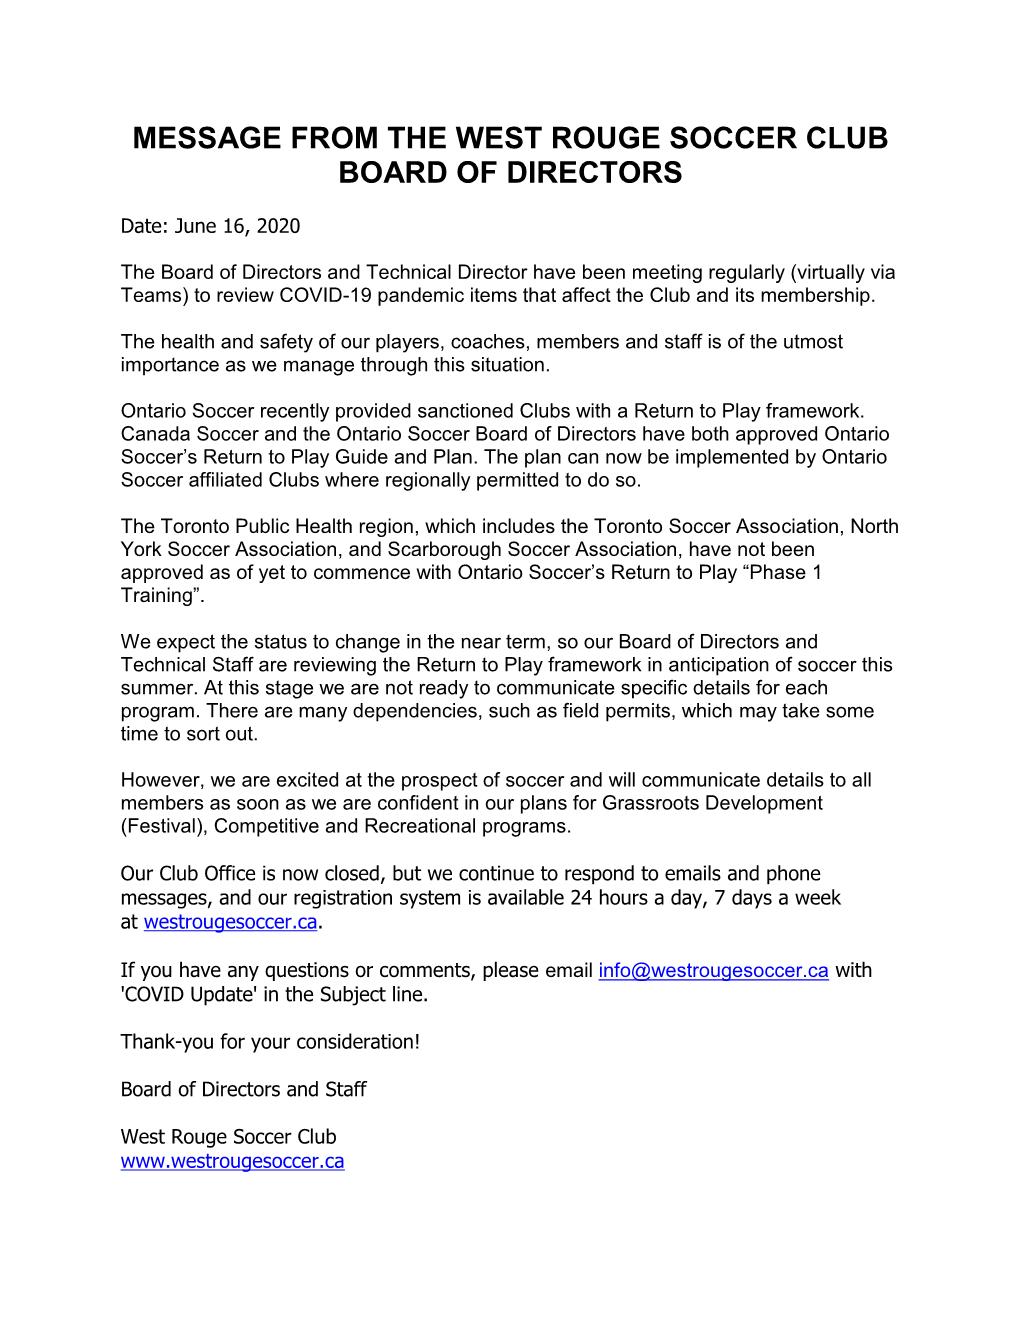 Message from the West Rouge Soccer Club Board of Directors